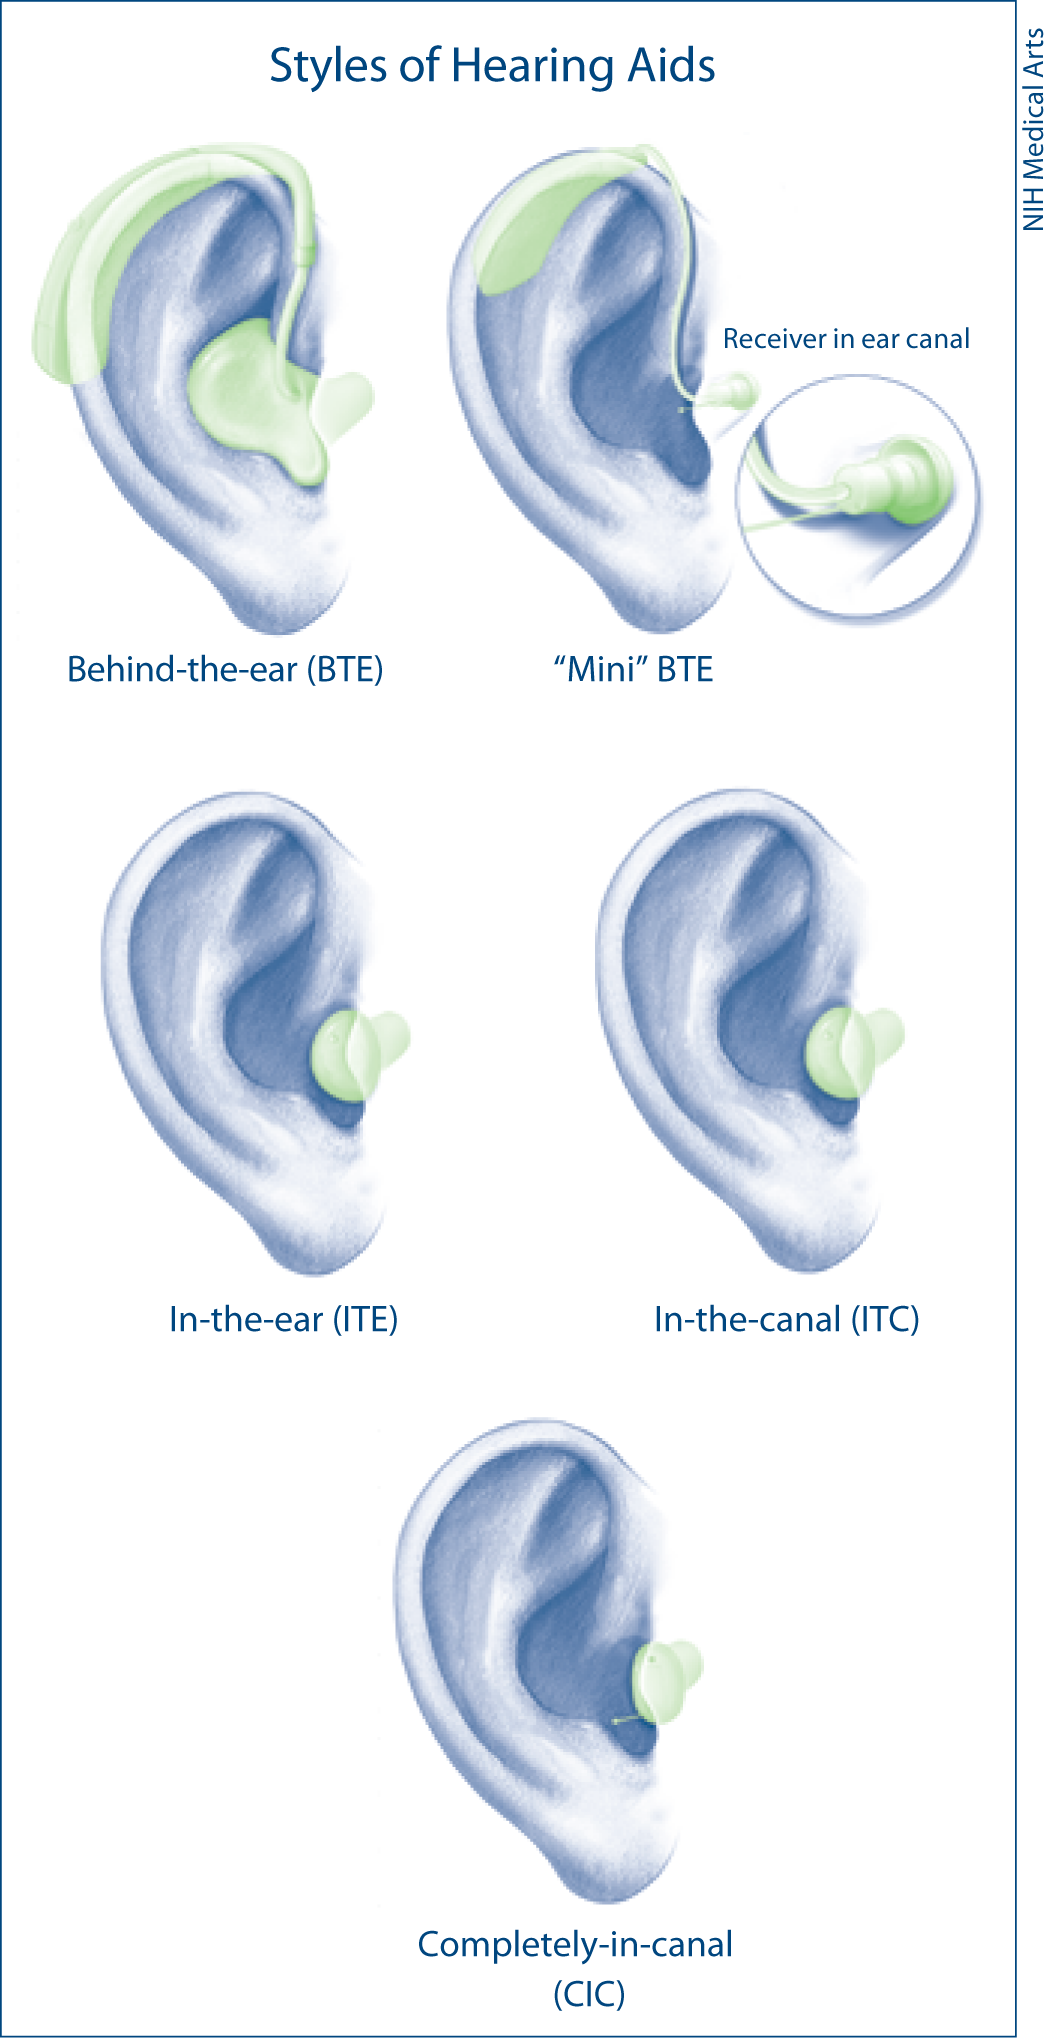 <p>Styles of Hearing Aids</p>